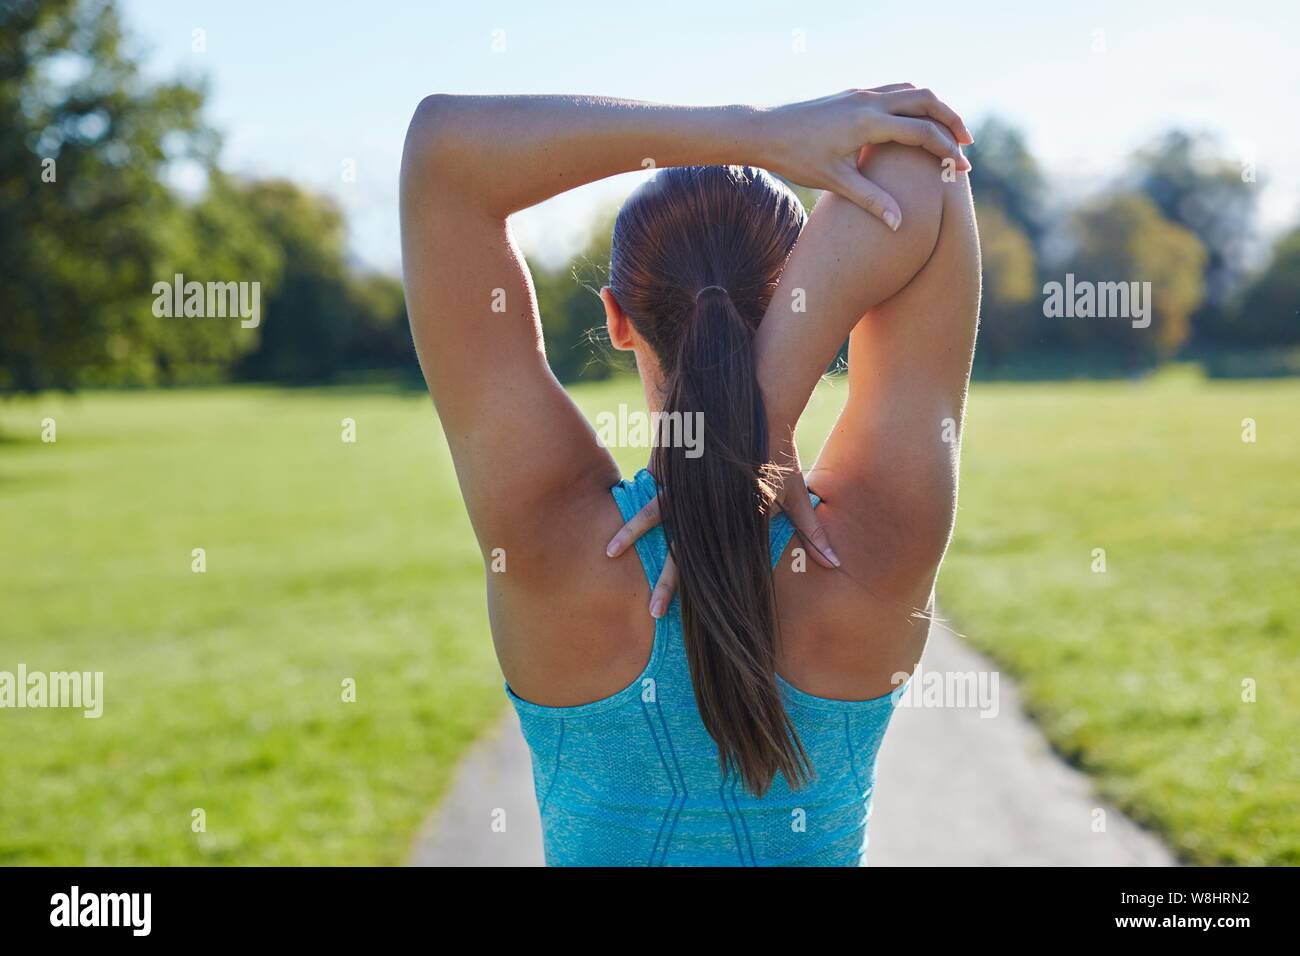 Young woman stretching arm, rear view. Stock Photo